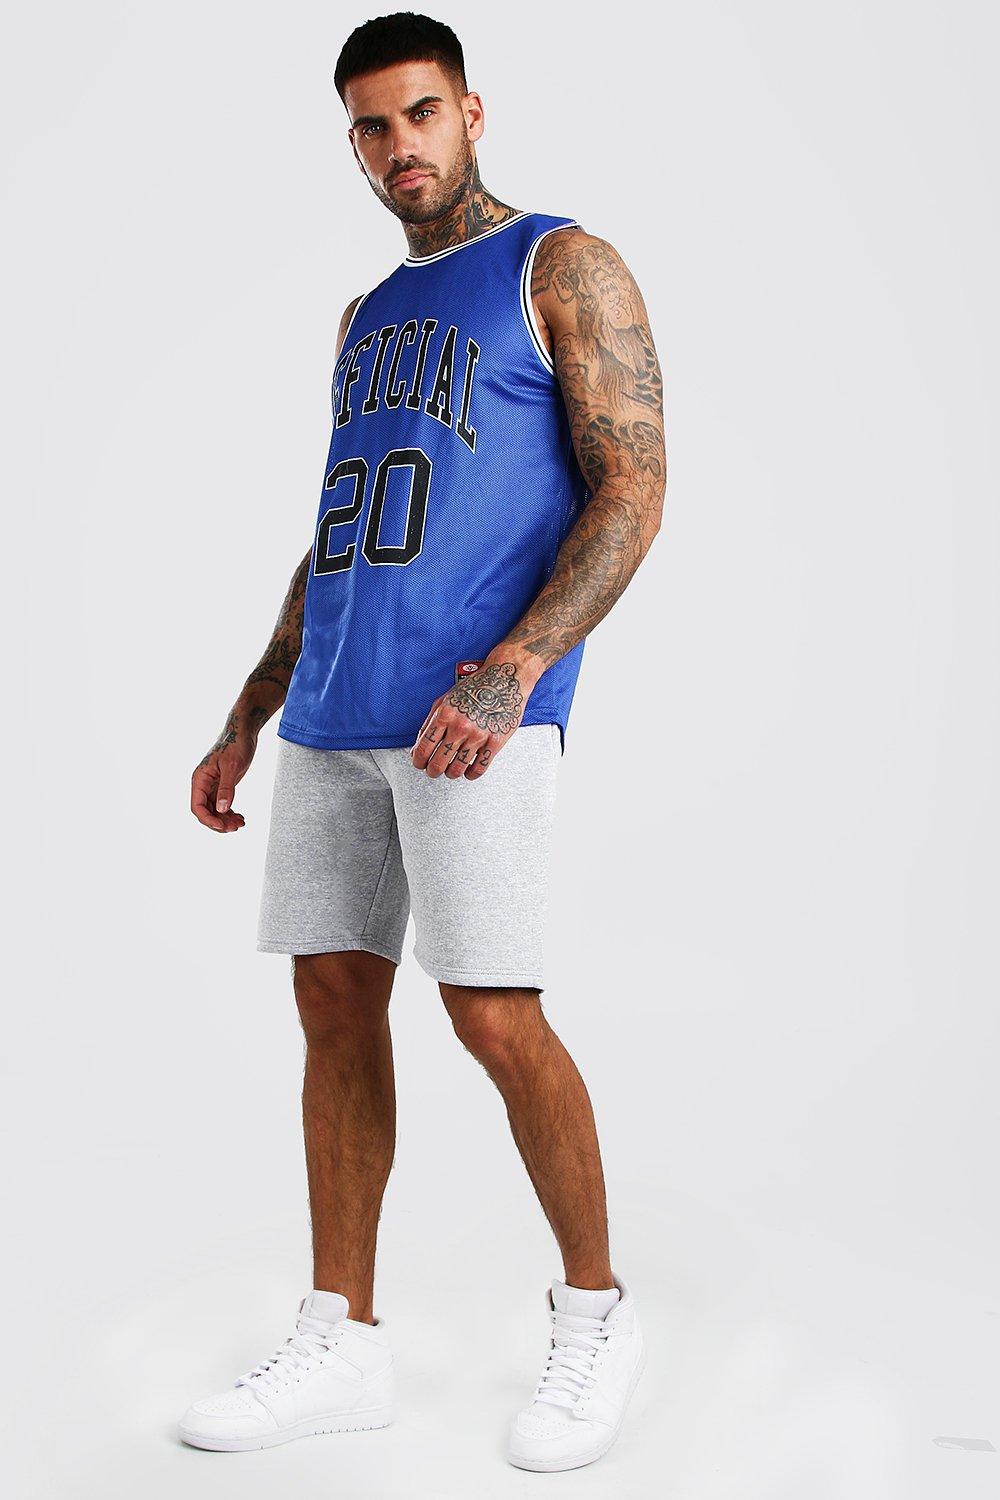 basketball tank top outfit